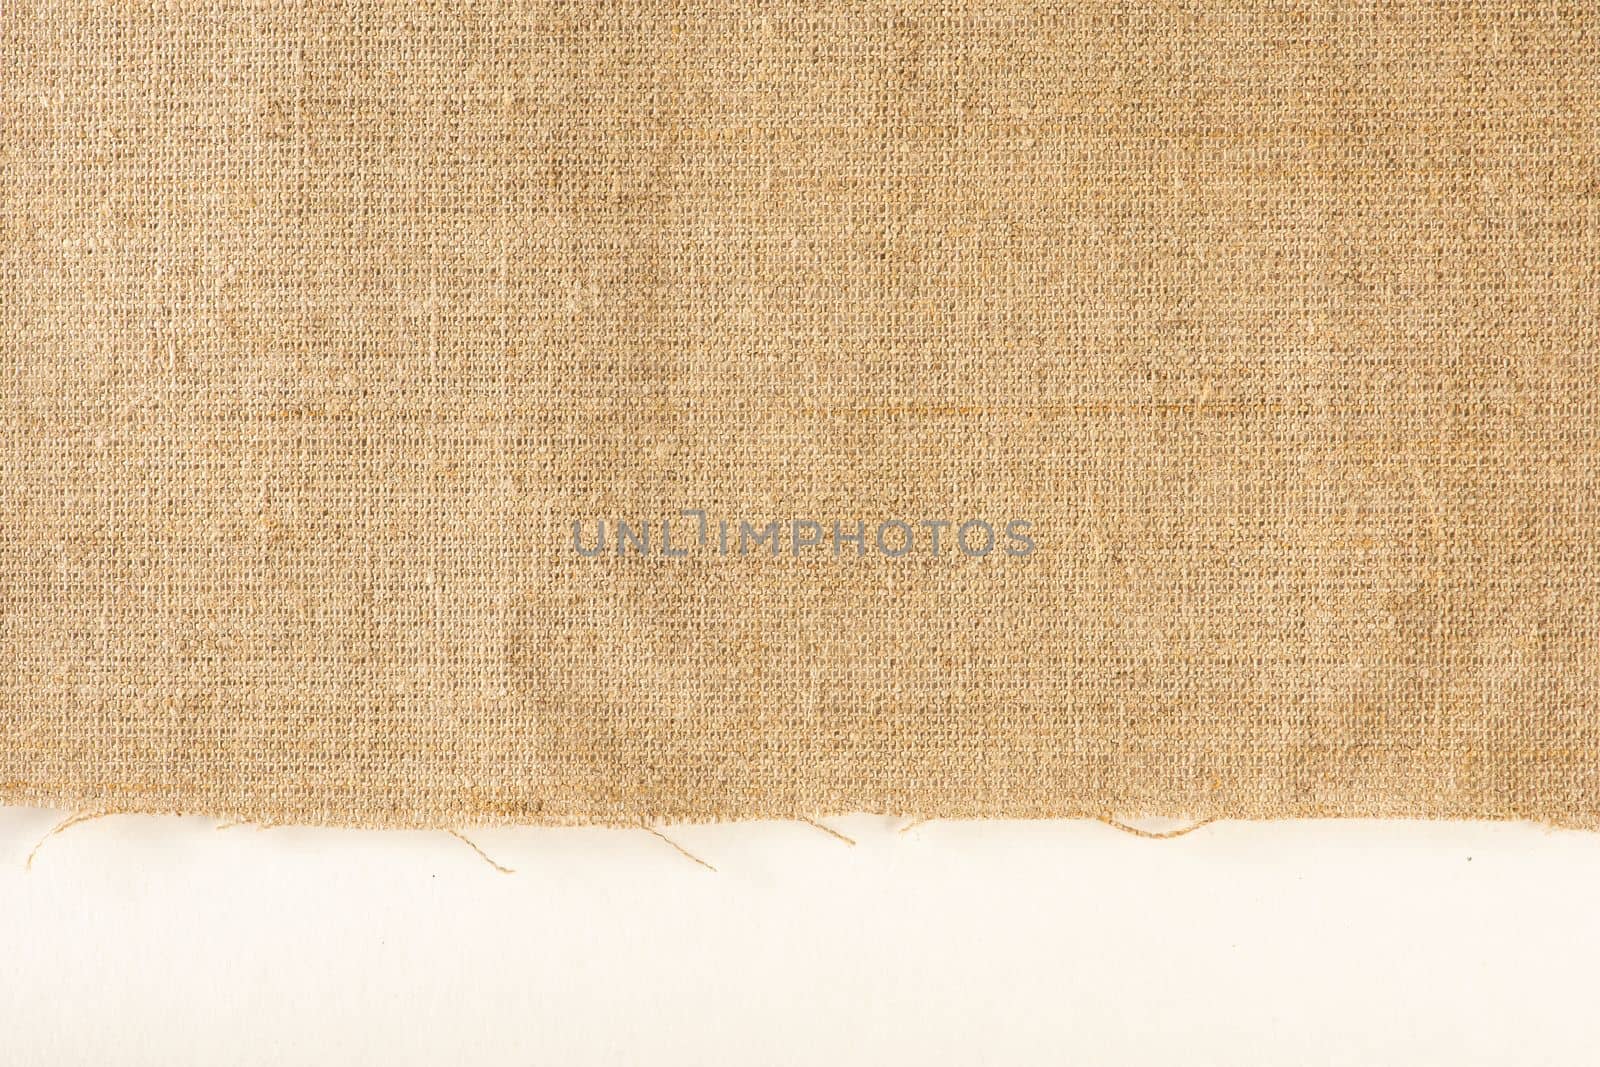 Texture of linen fabric. Natural linen fabric with a raw edge on a white background